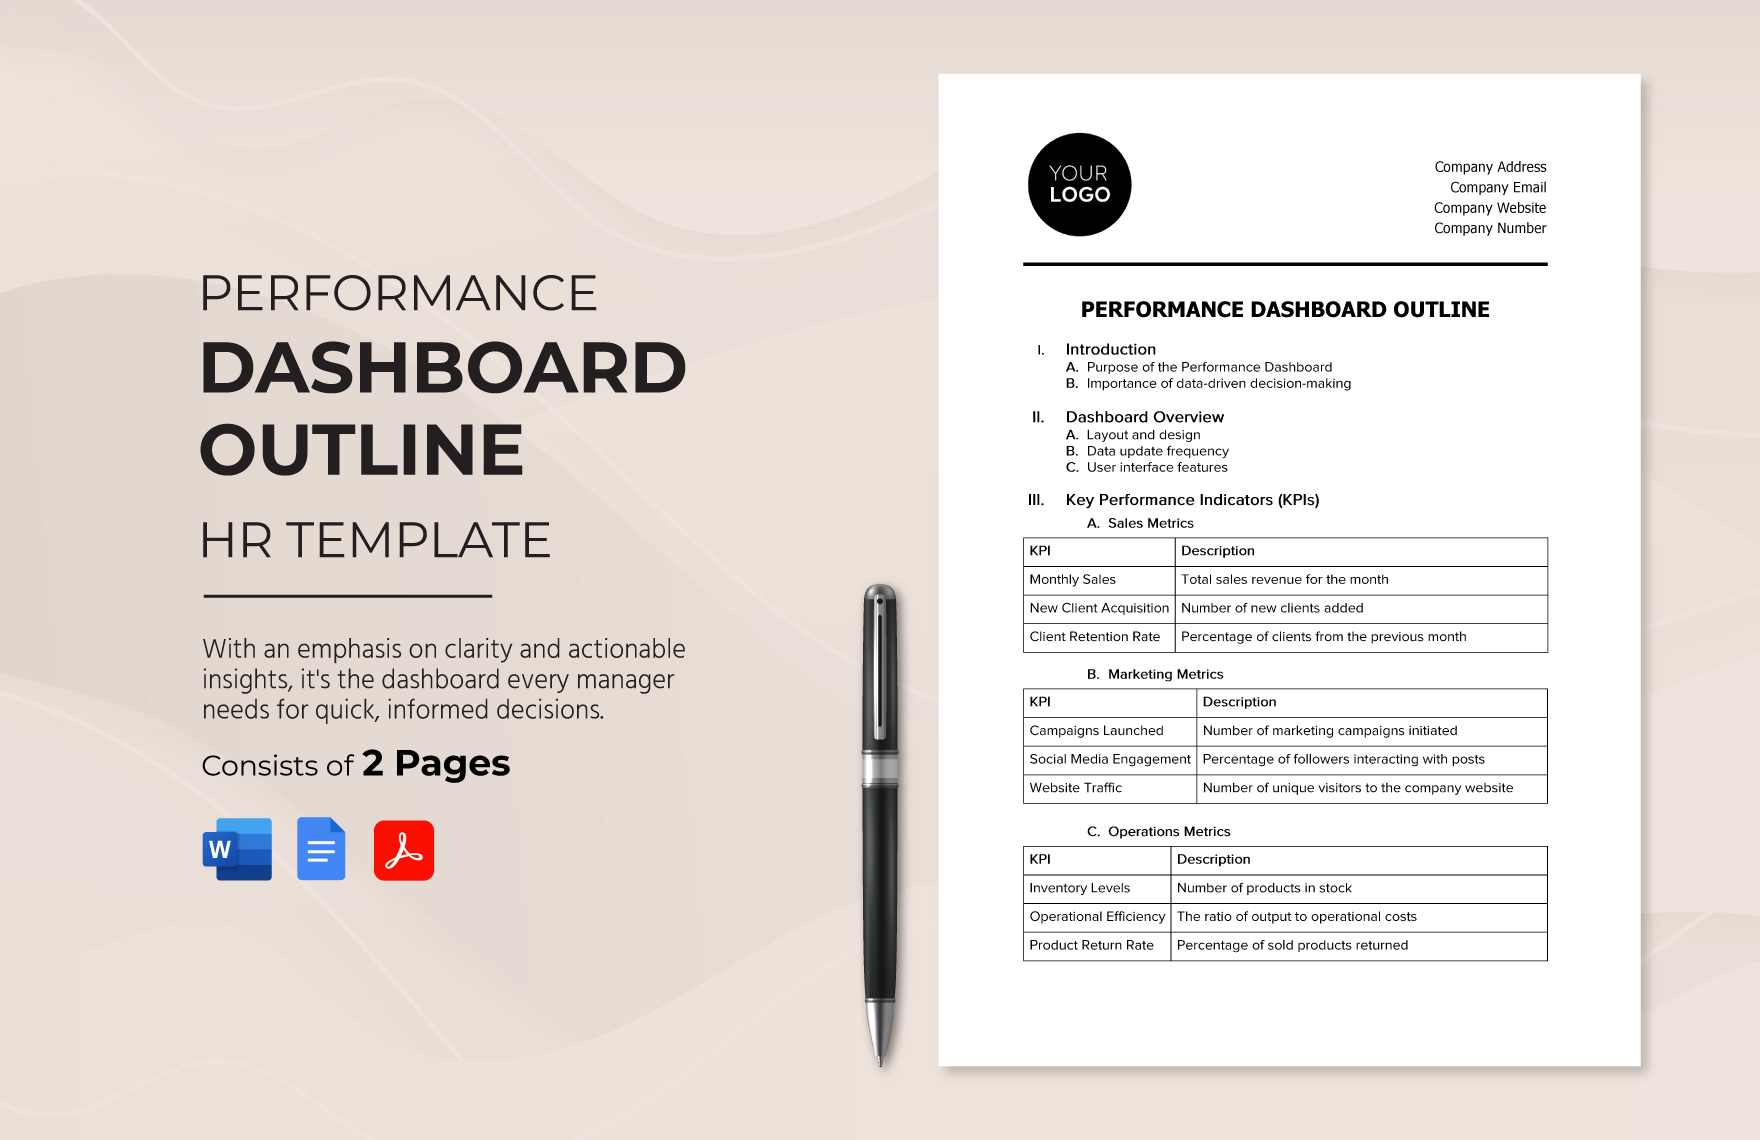 Performance Dashboard Outline HR Template in Word, Google Docs, PDF